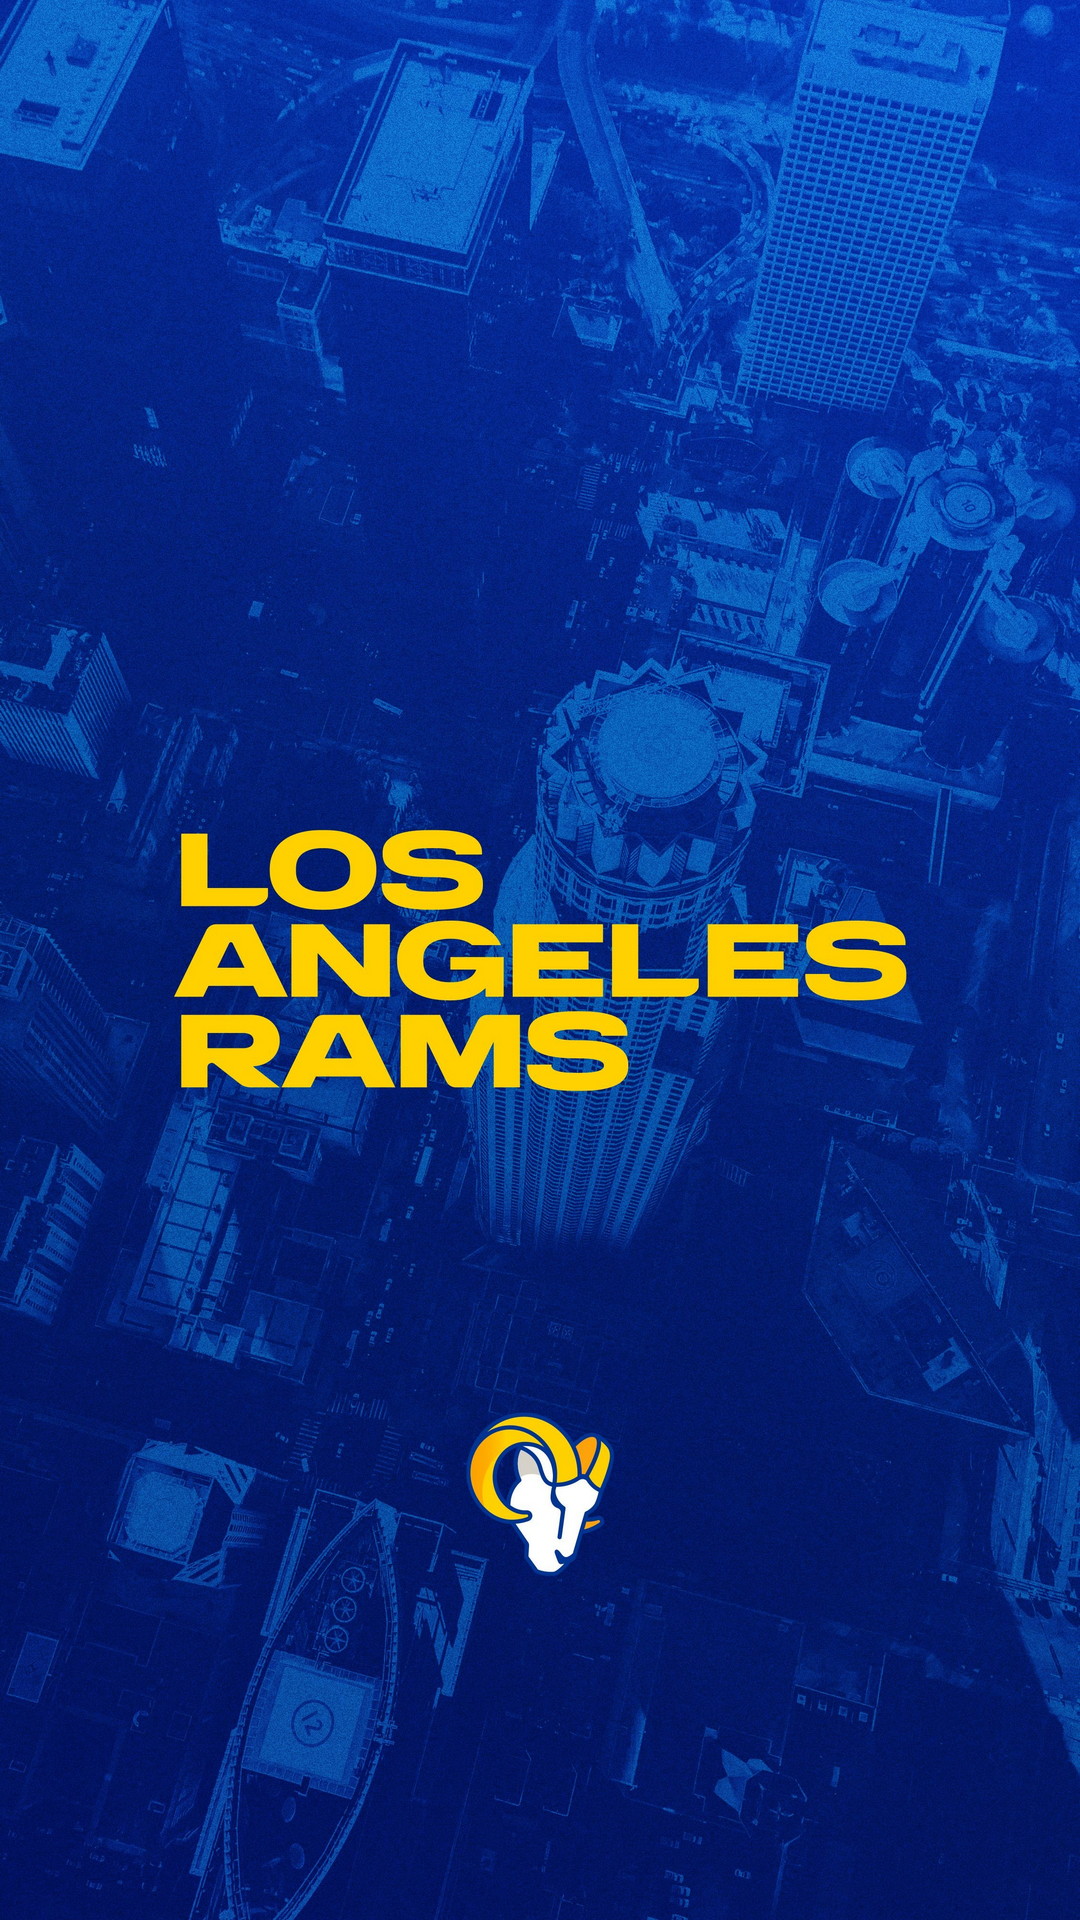 Los Angeles Rams iPhone Wallpaper Design With high-resolution 1080X1920 pixel. Donwload and set as wallpaper for your iPhone X, iPhone XS home screen backgrounds, XS Max, XR, iPhone8 lock screen wallpaper, iPhone 7, 6, SE, and other mobile devices